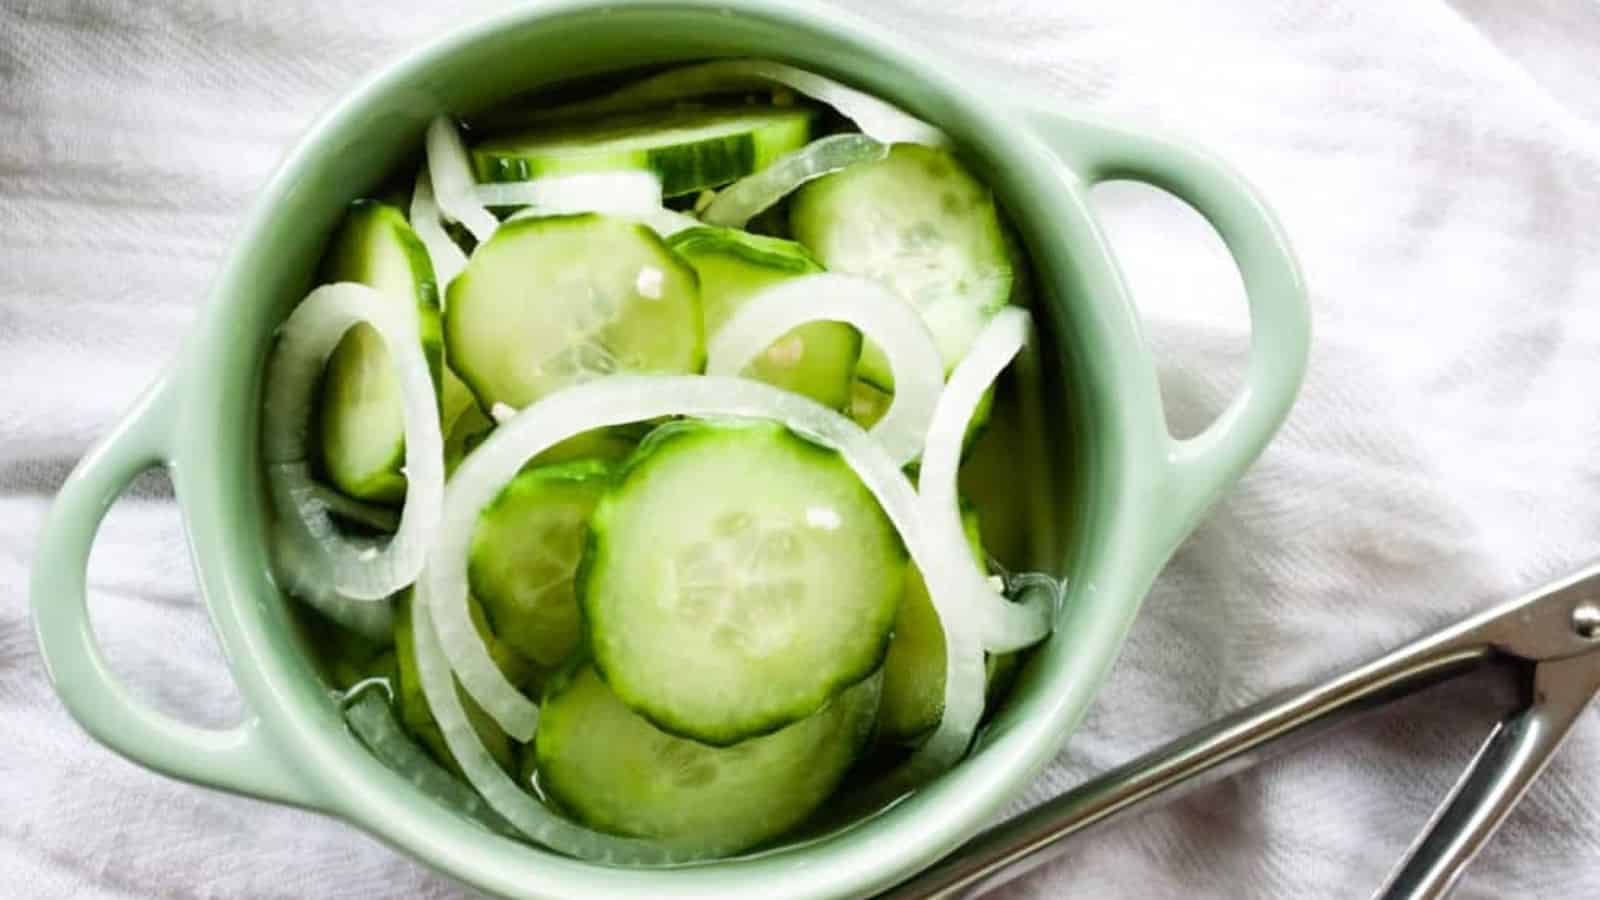 Top view of cucumber onion salad in a green bowl.